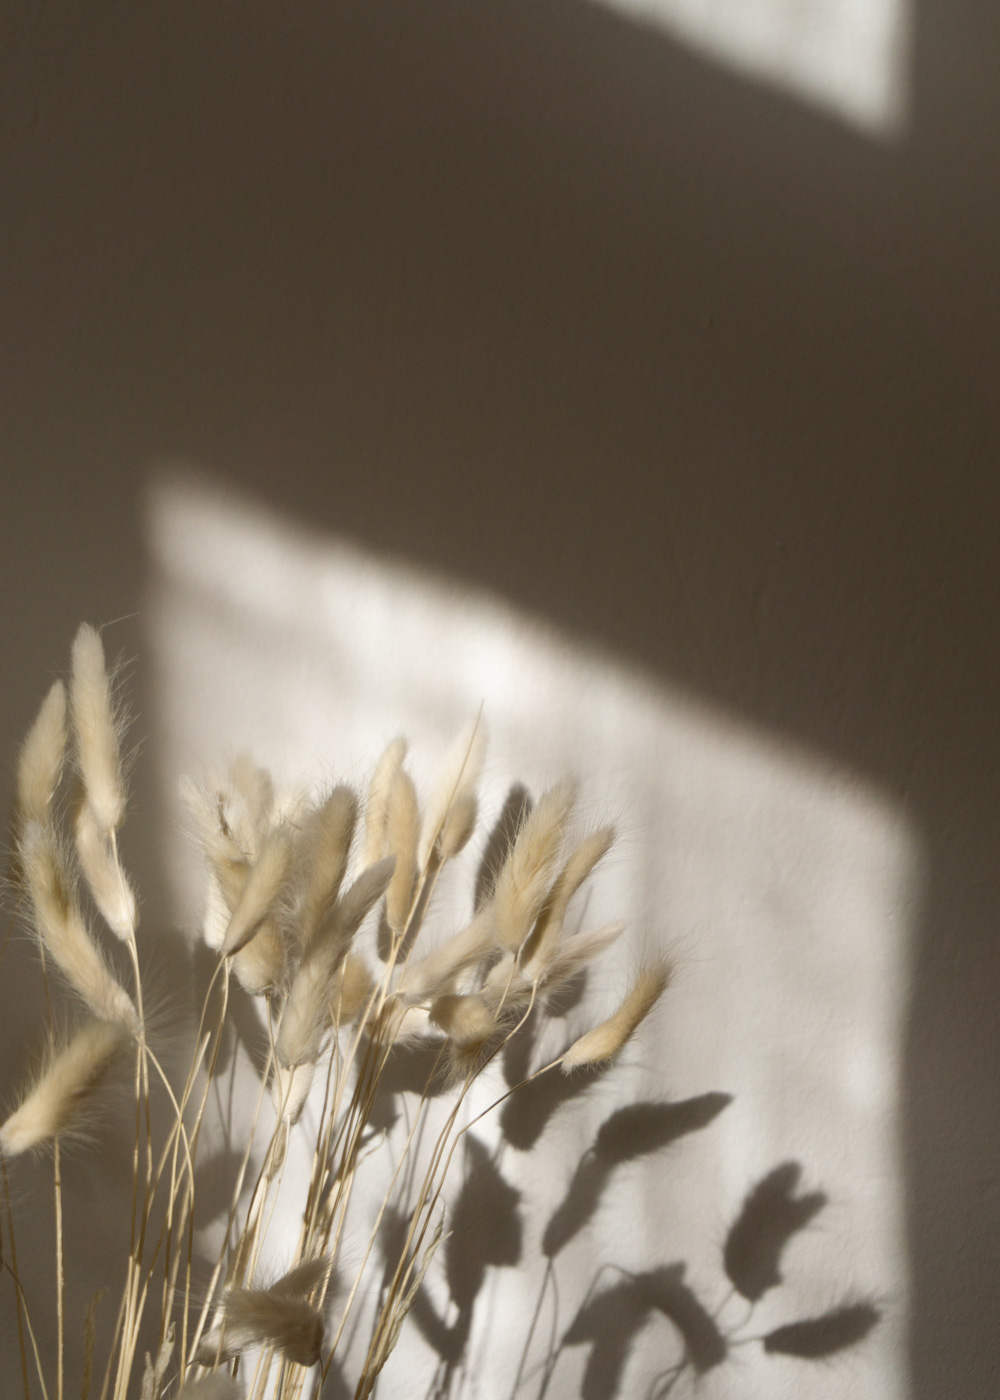 Dried Grass and Shadows ~ Simple For Everyday Slow Living | Minimalist Home, Scandinavian Design, Sustainable Home, Natural Aesthetic | Product Photography, Light and Shadows | RG Daily Blog, Copyright © Rebecca Goddard